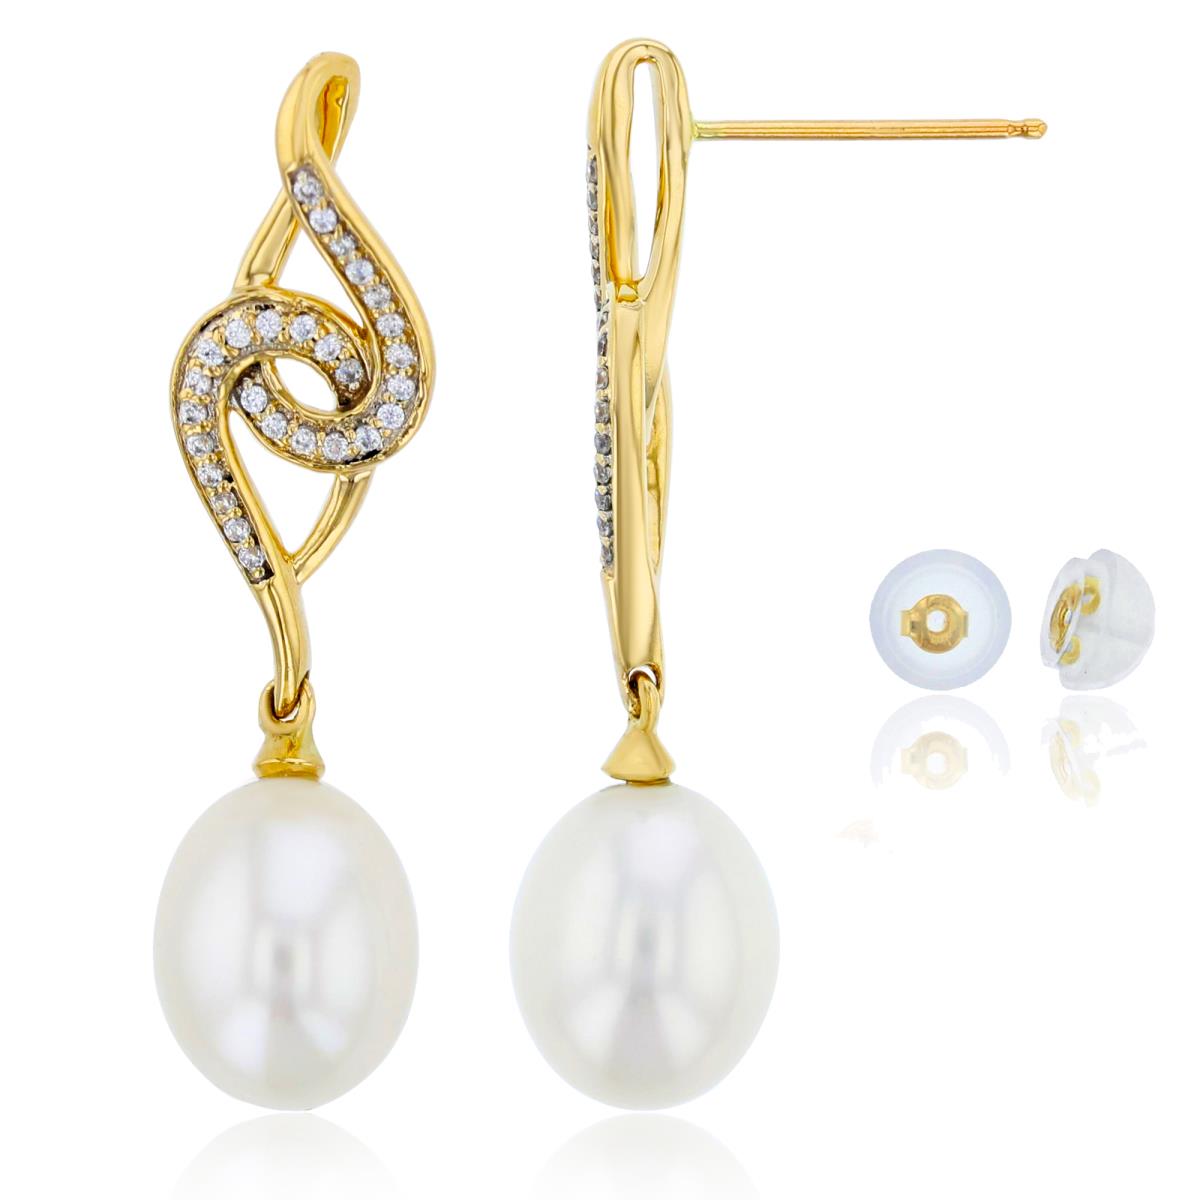 10K Yellow Gold 0.22 CTTW Rnd Diam & 10X8 mm TD White Pearl Drop Dangling Earring with Silicone Backs